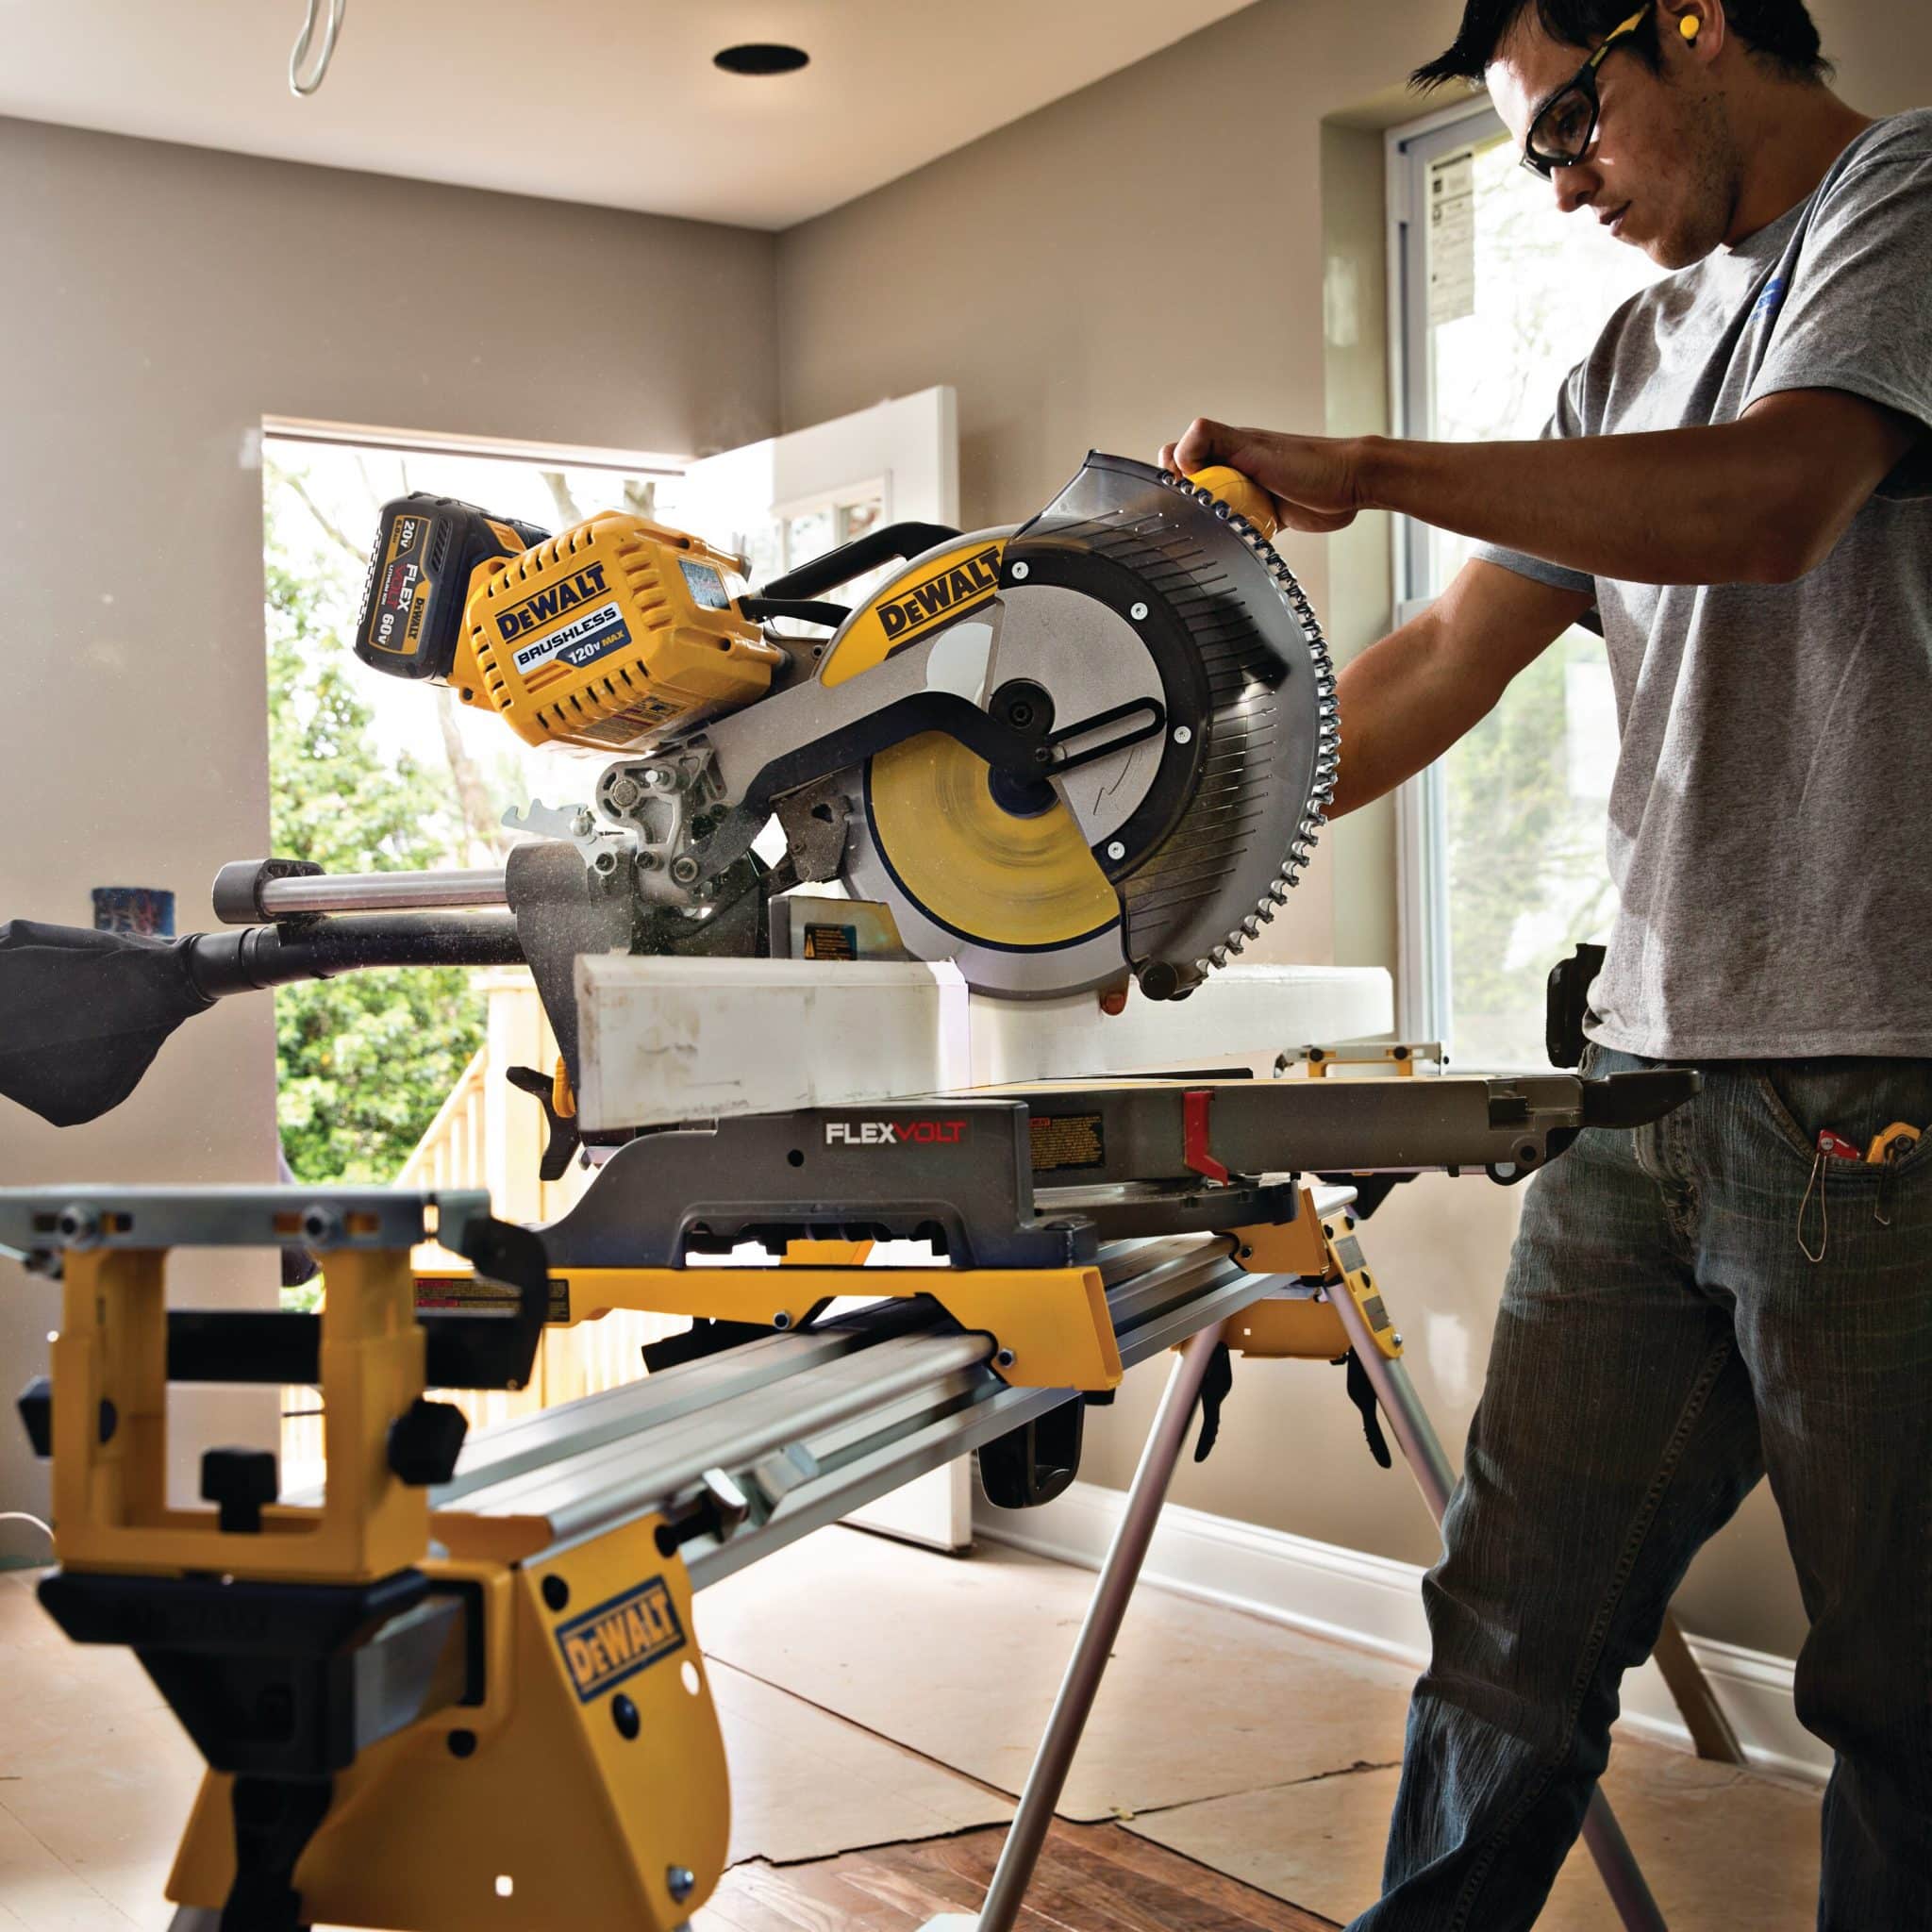 DHS790AT2 scaled - 11 Best Miter Saws in 2023: Detailed Reviews & Buyer’s Guide - HandyMan.Guide - Miter Saw